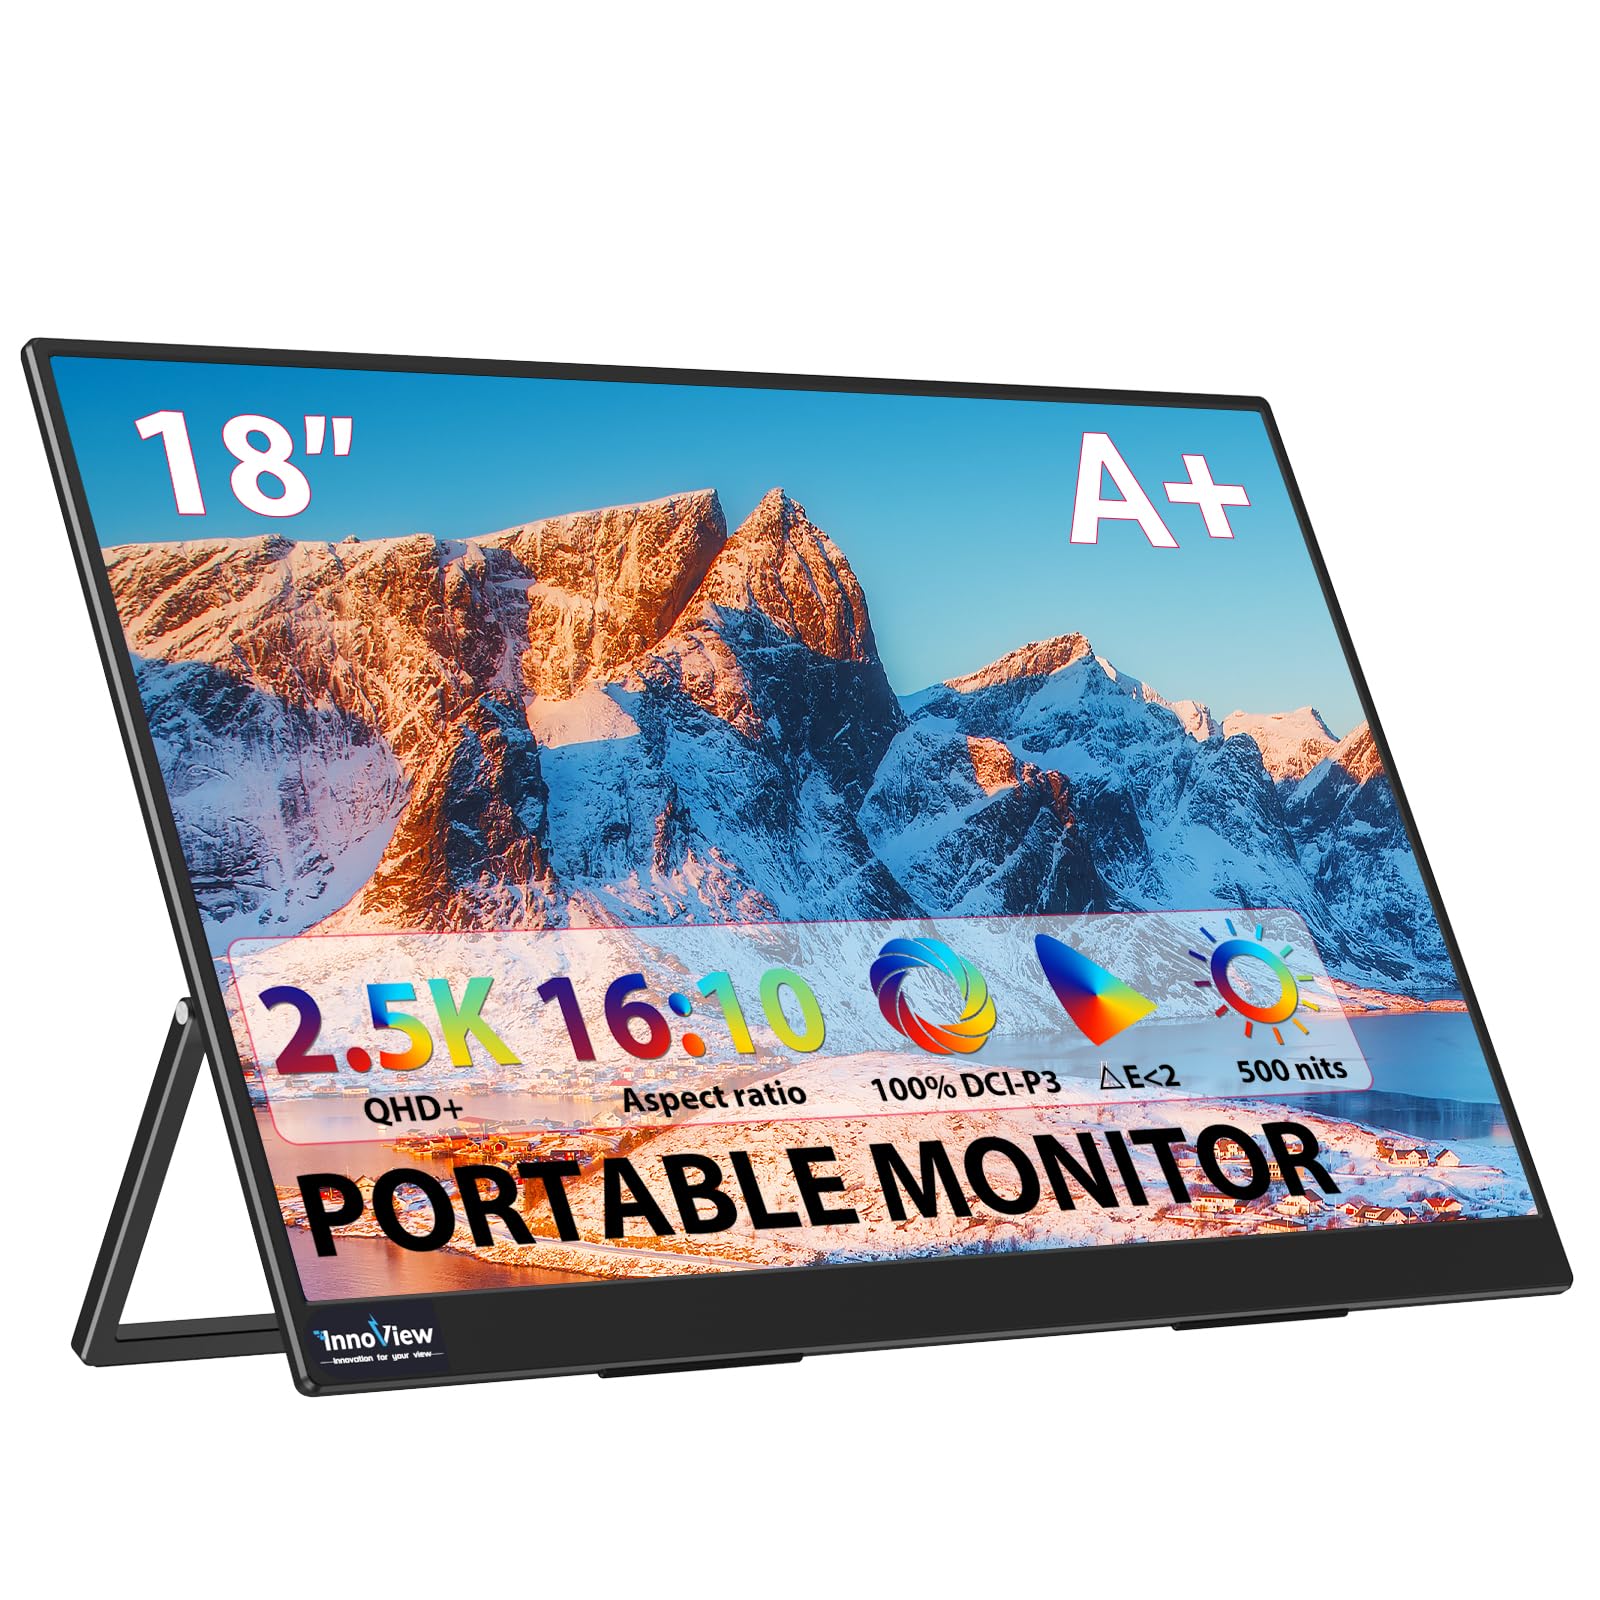 InnoView Portable Monitor, 18'' 2.5K QHD 100% DCI-P3 Large Portable Monitor for Laptop 2560x1600 500 Nits IPS Eye Care HDR FreeSync Frameless Laptop Screen Extender for Mac Switch Xbox PS4/5